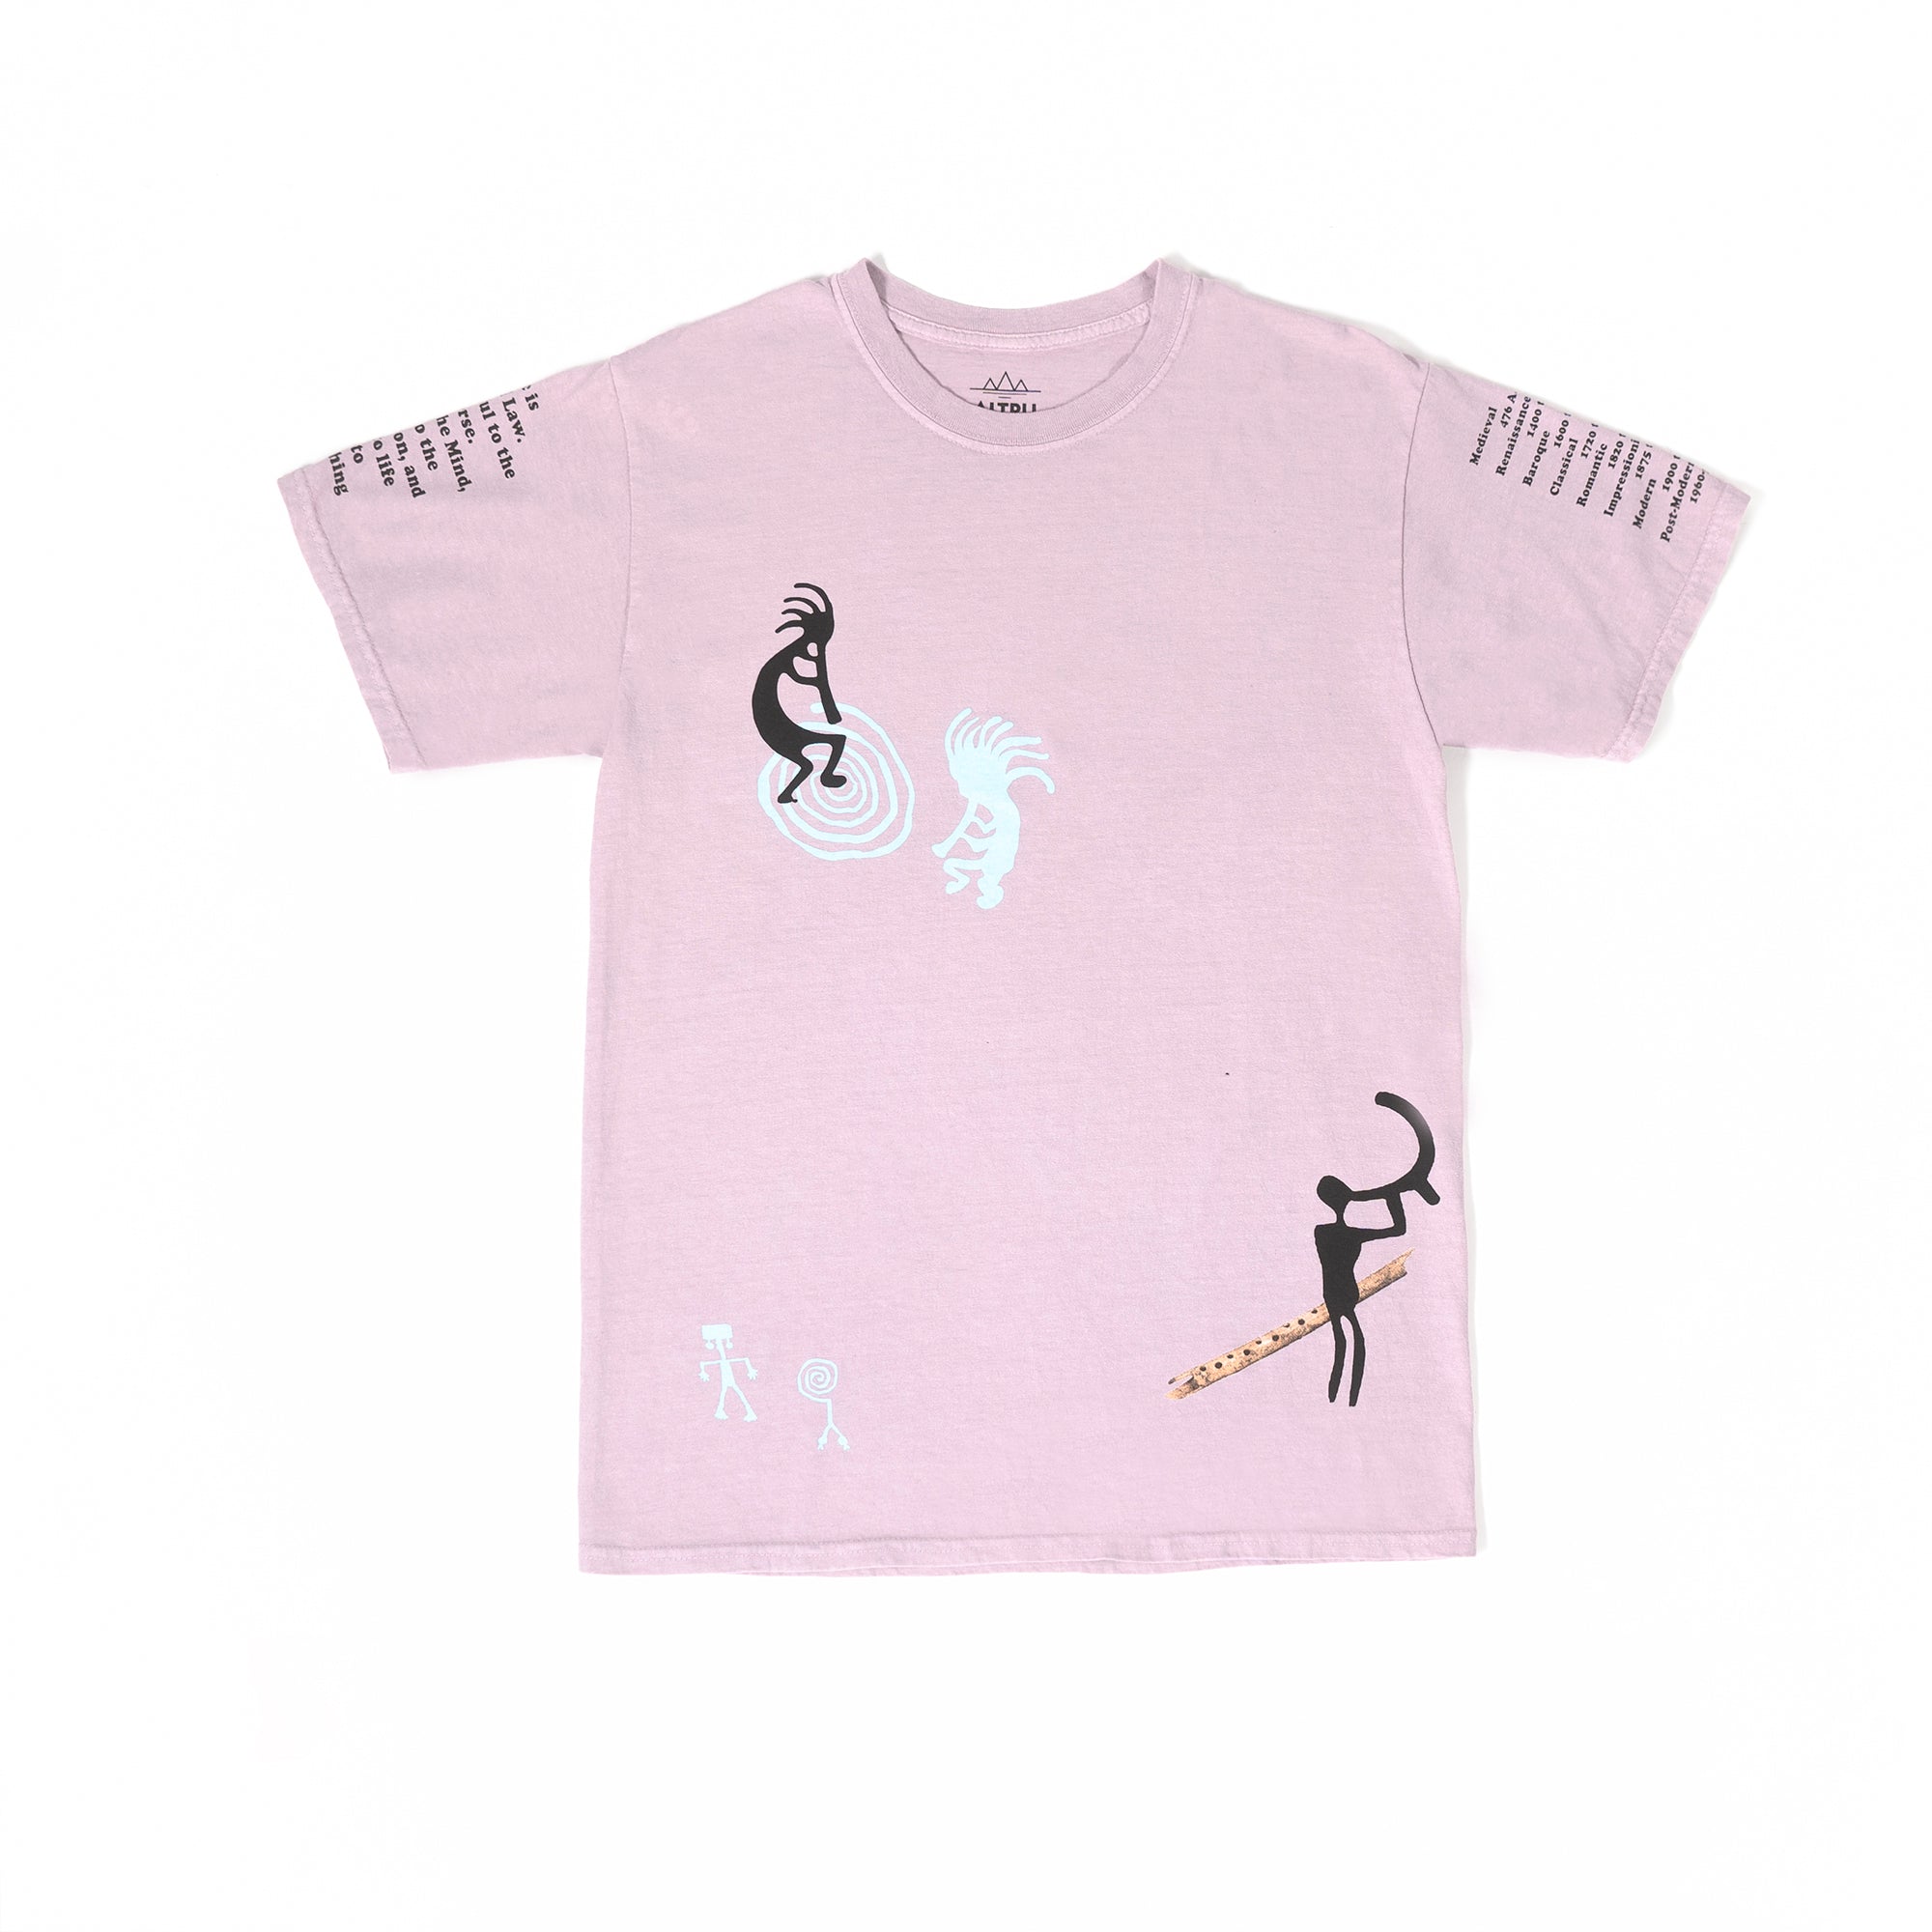 New Primitive orchid graphic tee